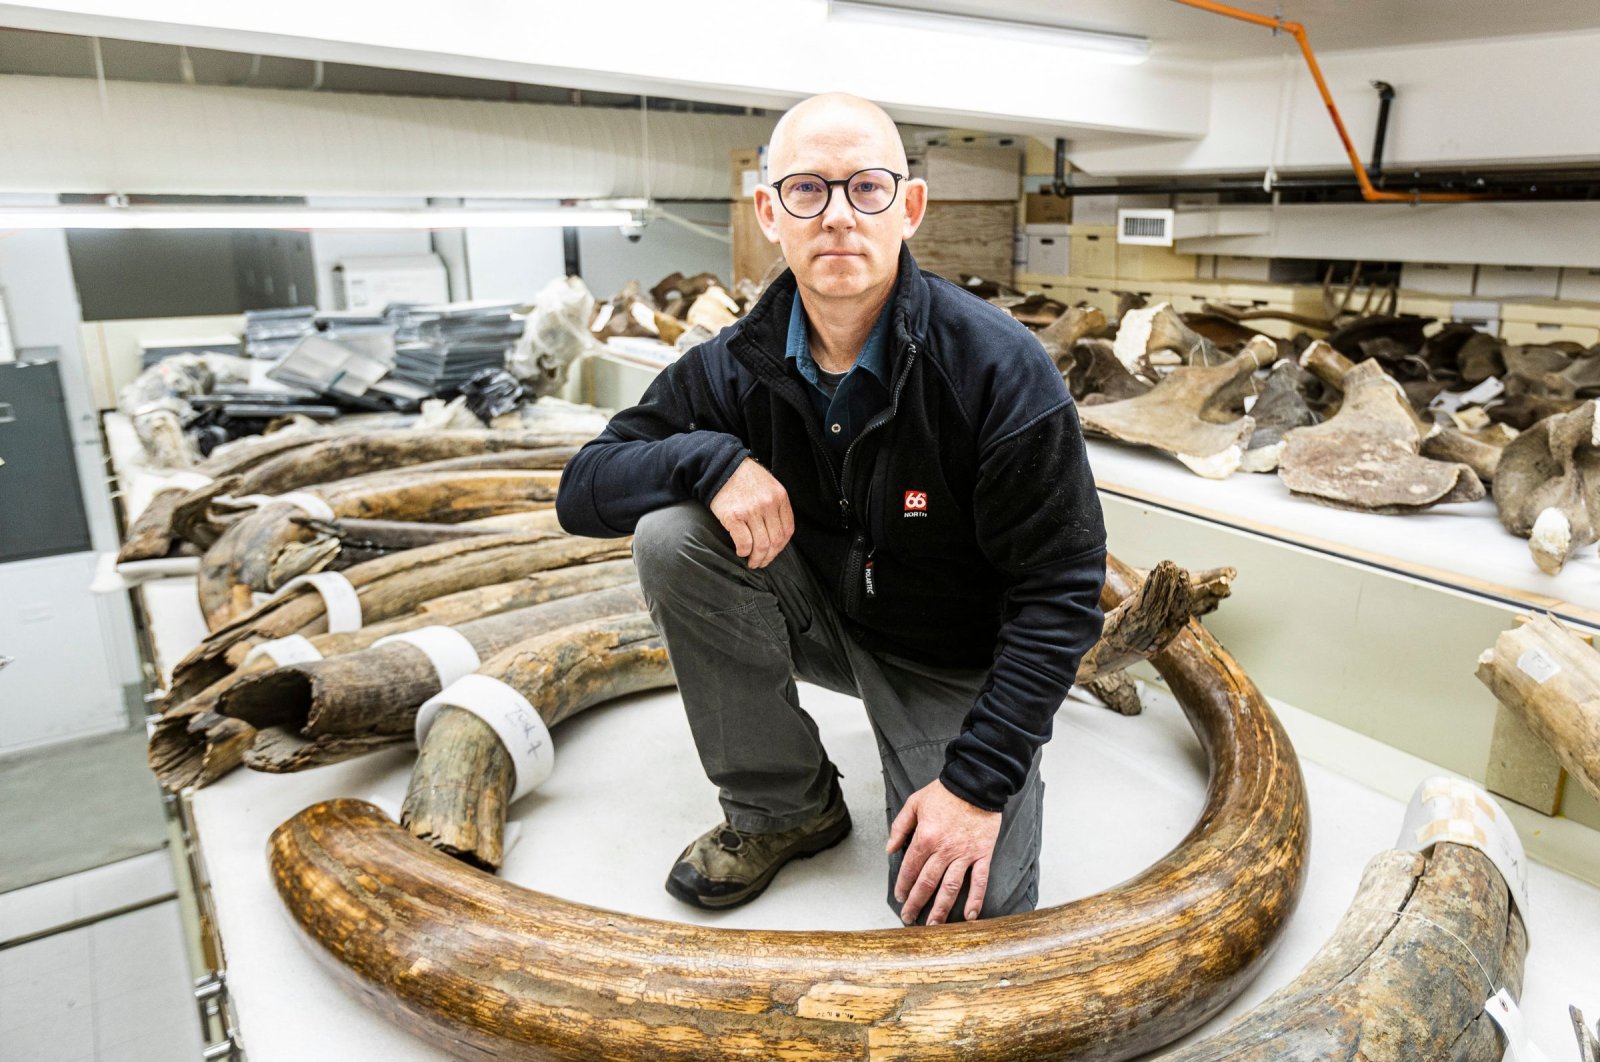 Mat Wooller, director of the Alaska Stable Isotope Facility, kneels among a collection of mammoth tusks at the University of Alaska Museum of the North, August 12, 2021. (Photo by JR ANCHETA / University of Alaska Fairbanks via AFP)